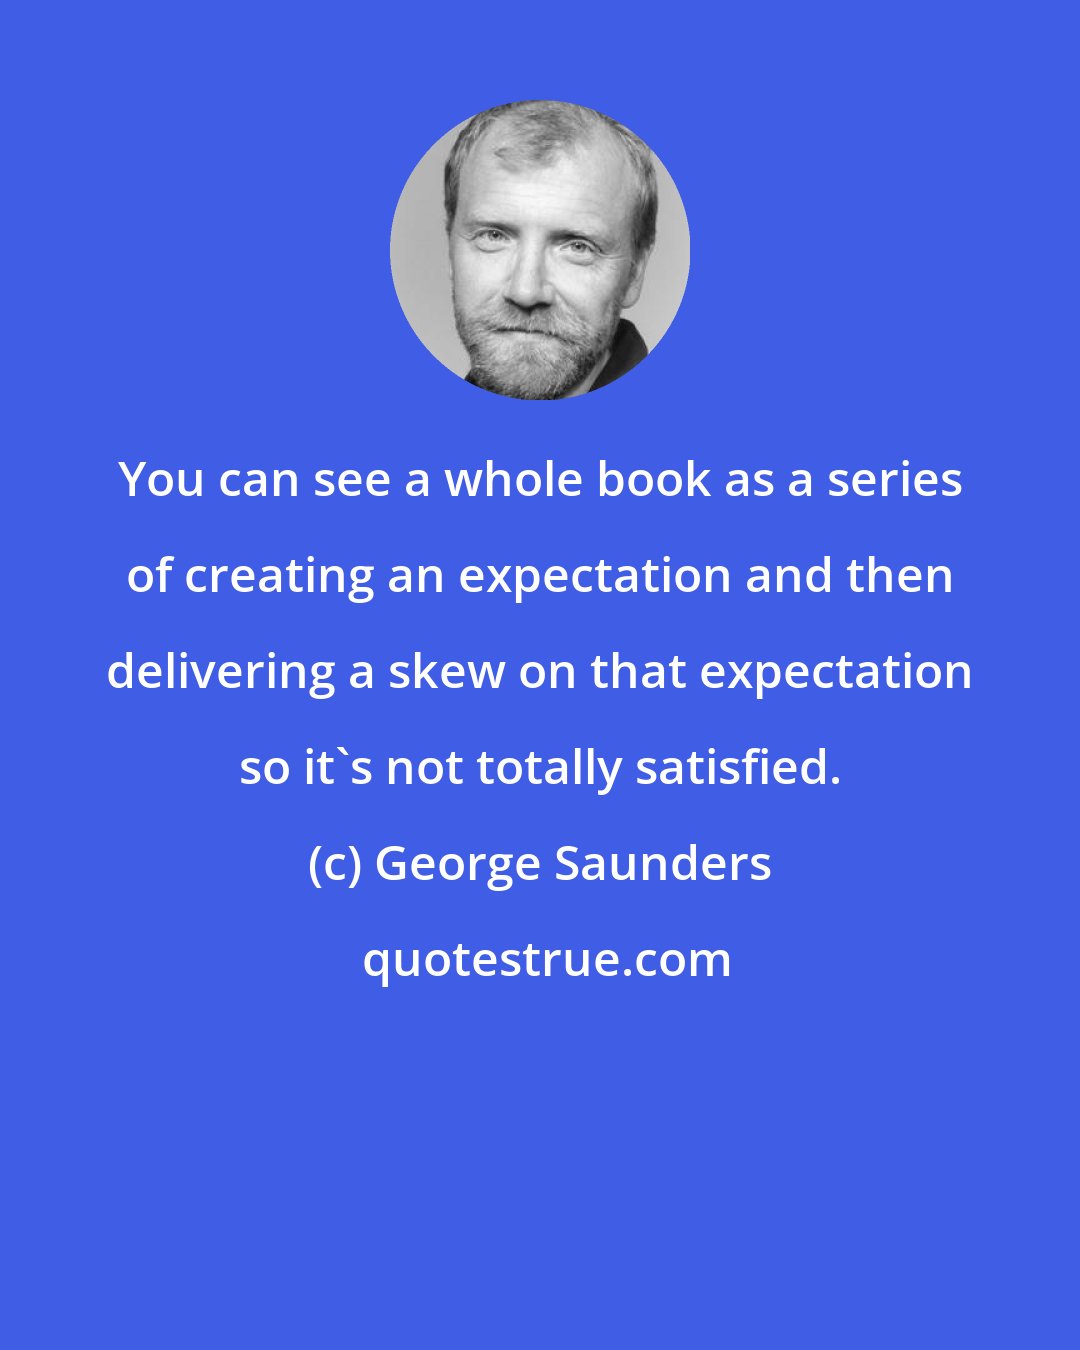 George Saunders: You can see a whole book as a series of creating an expectation and then delivering a skew on that expectation so it's not totally satisfied.